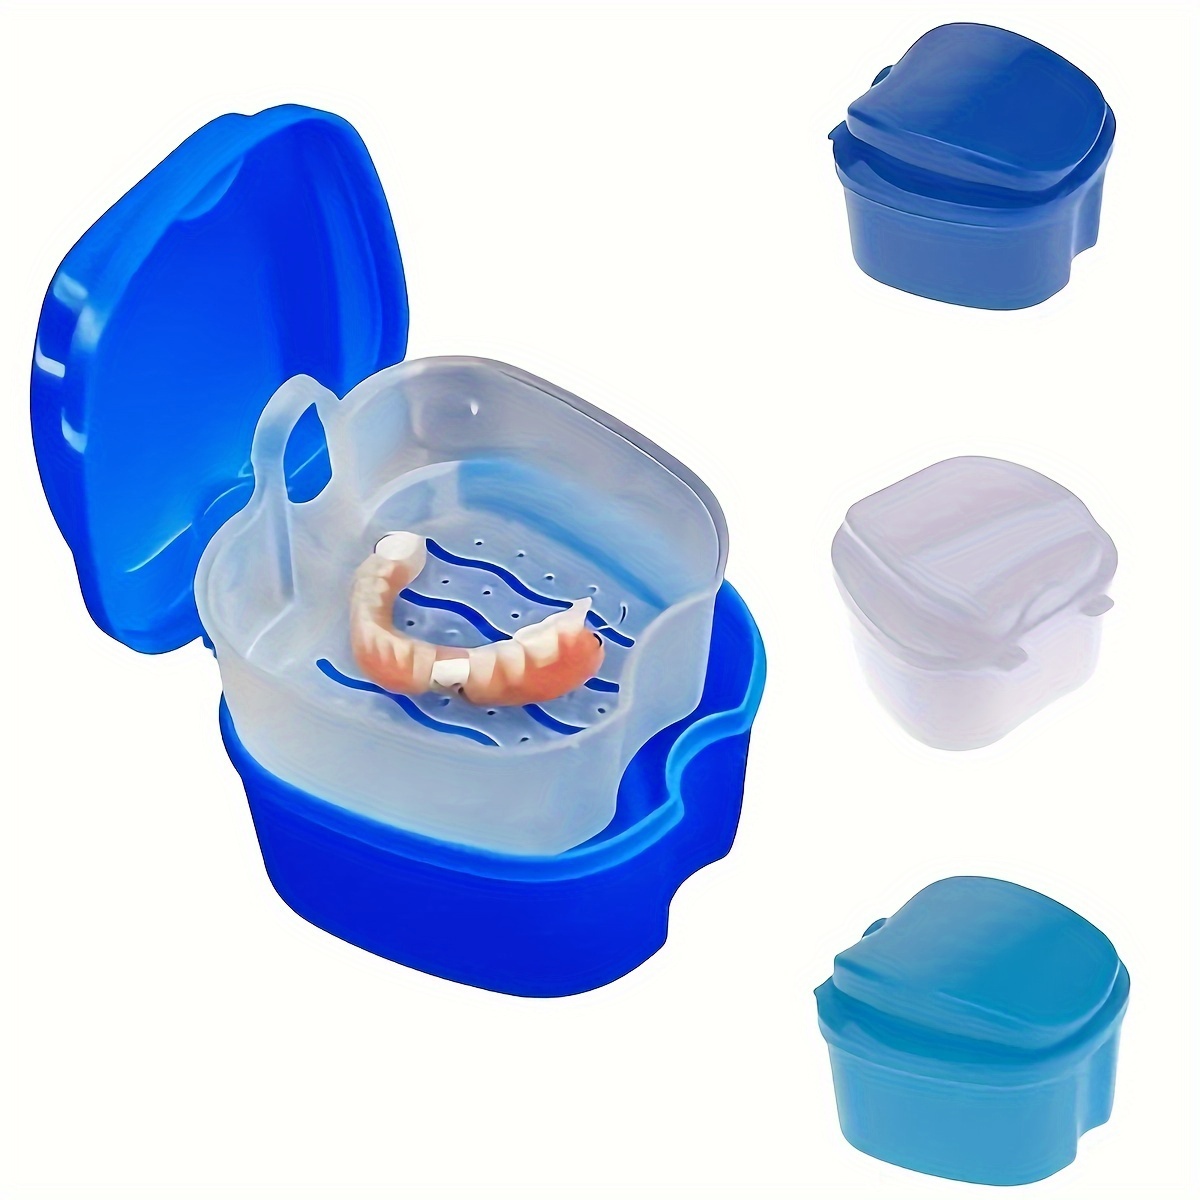 

1pc Denture Bath Case Cup Box Holder Cleaner, False Teeth Storage Soak Container With Strainer Basket, Braces Mouth Guard Night Guard Retainers For Travel Cleaning